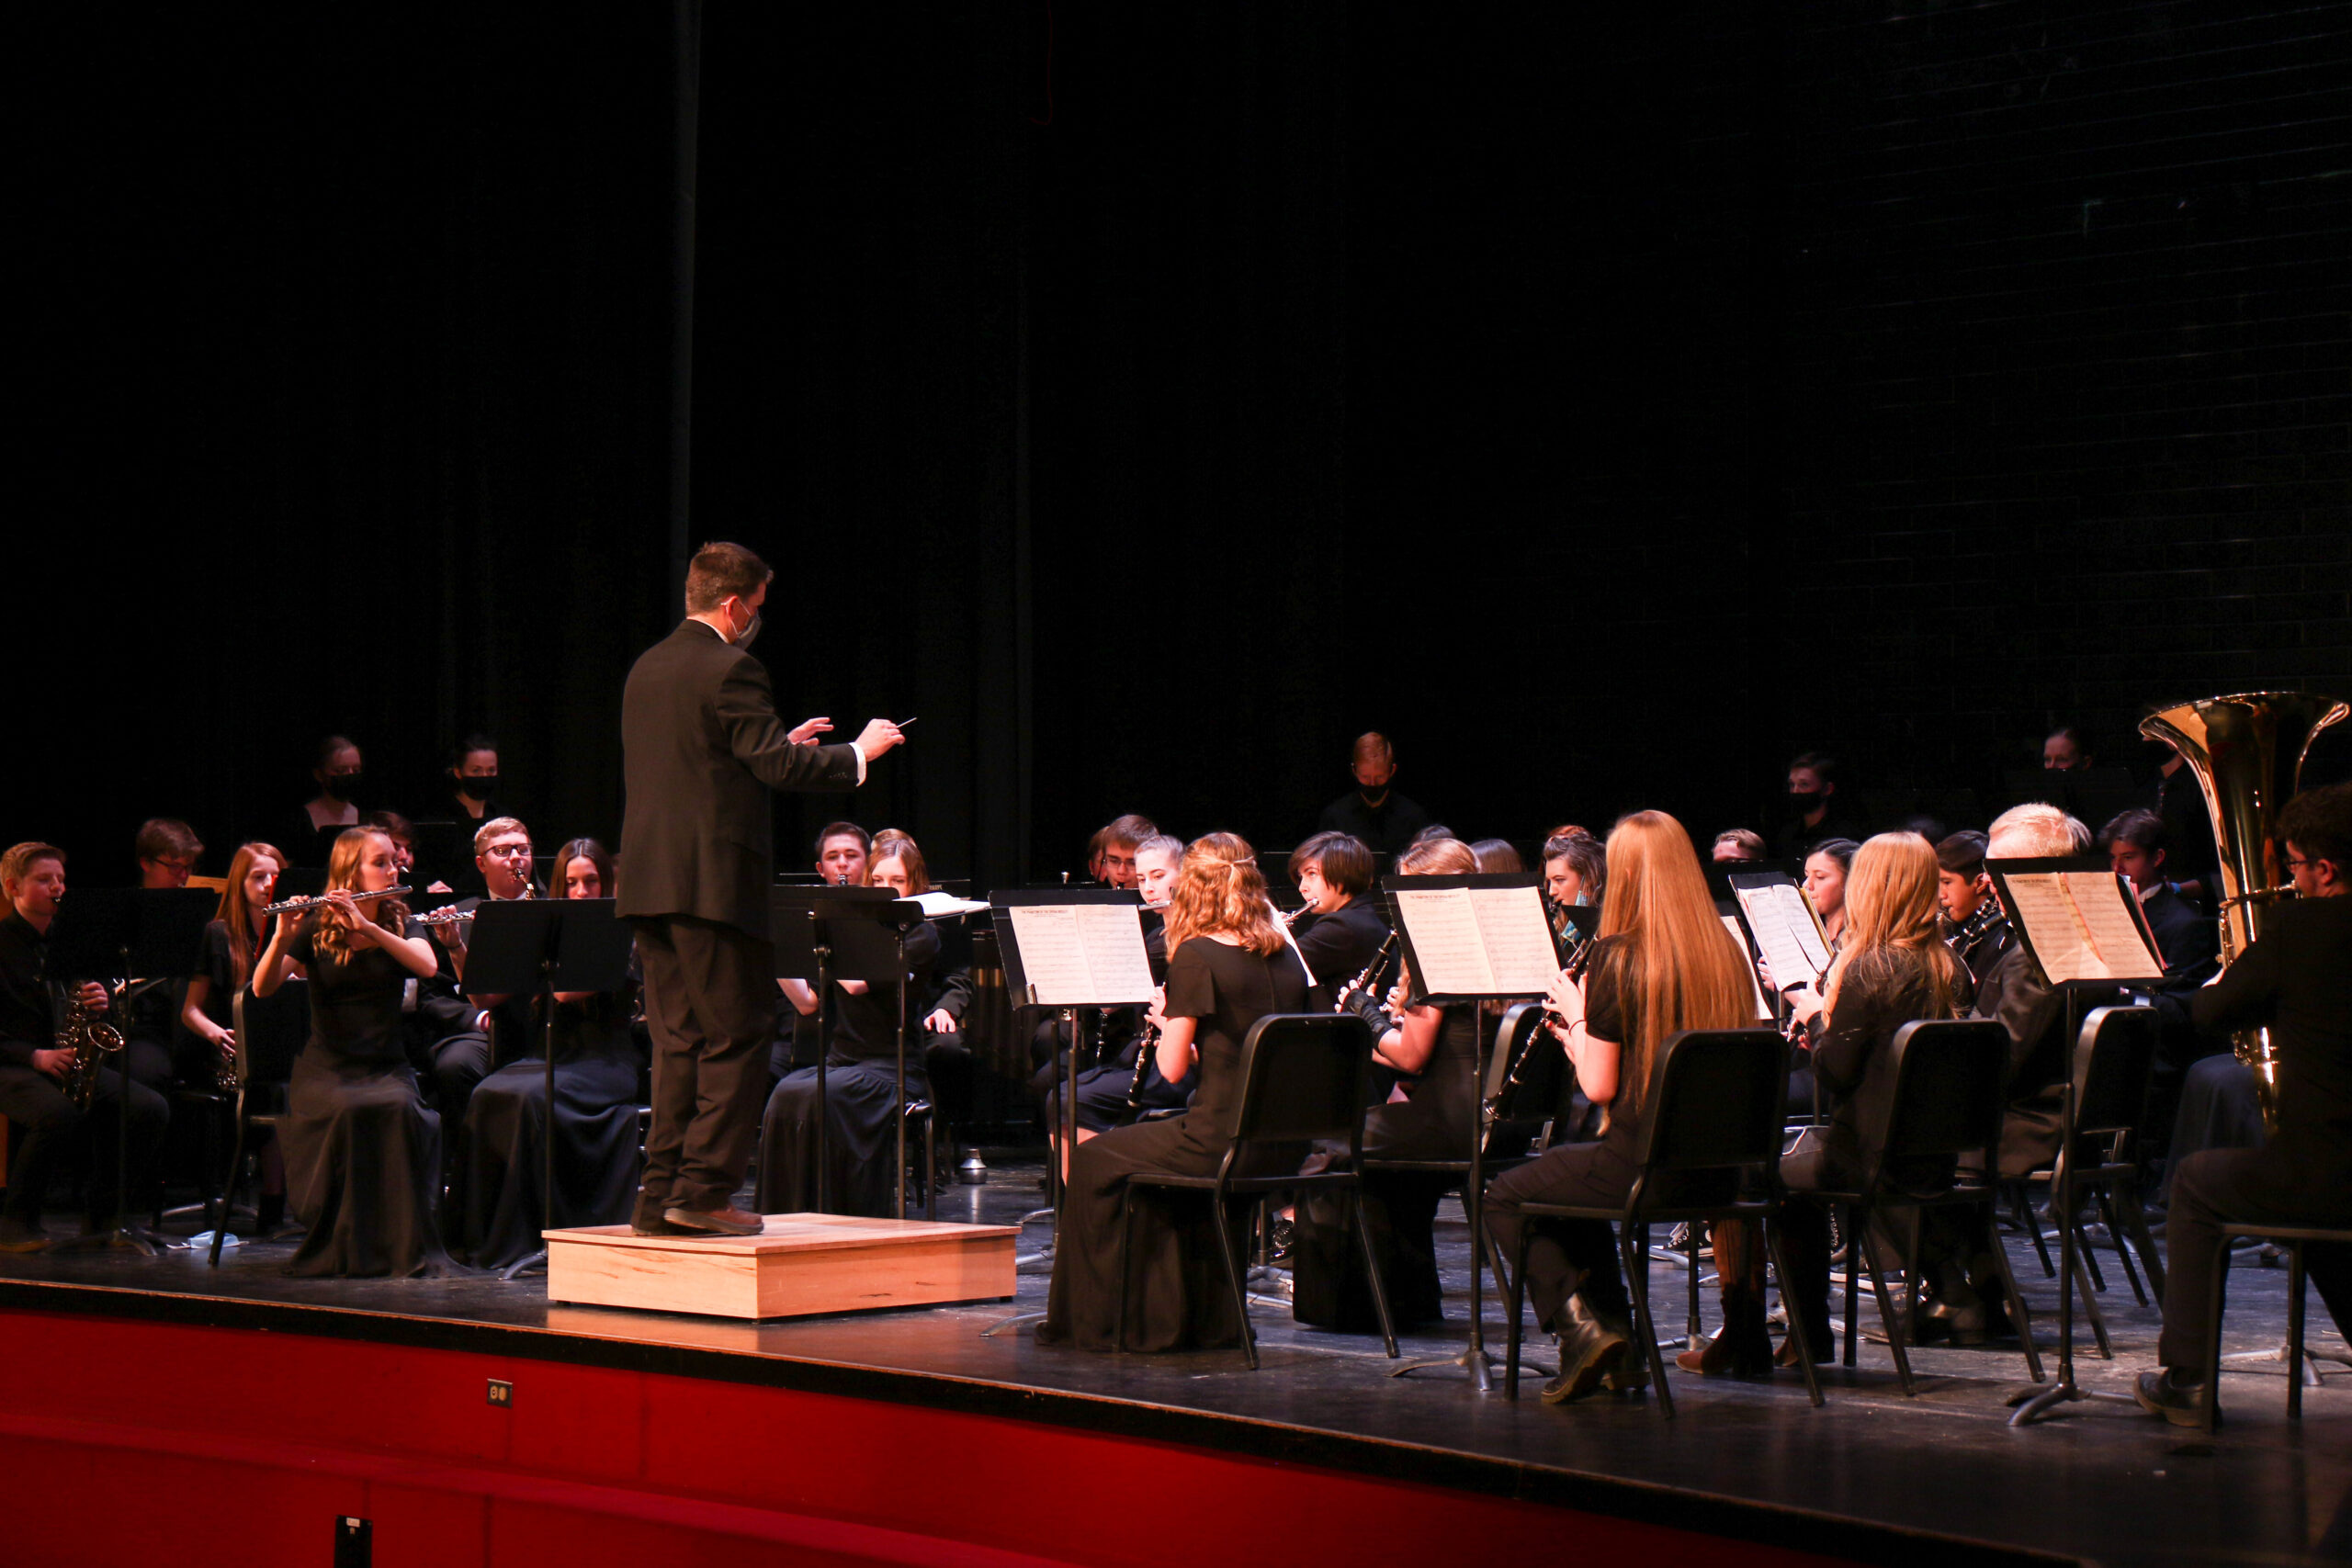 Band, choir students perform in long-awaited concert